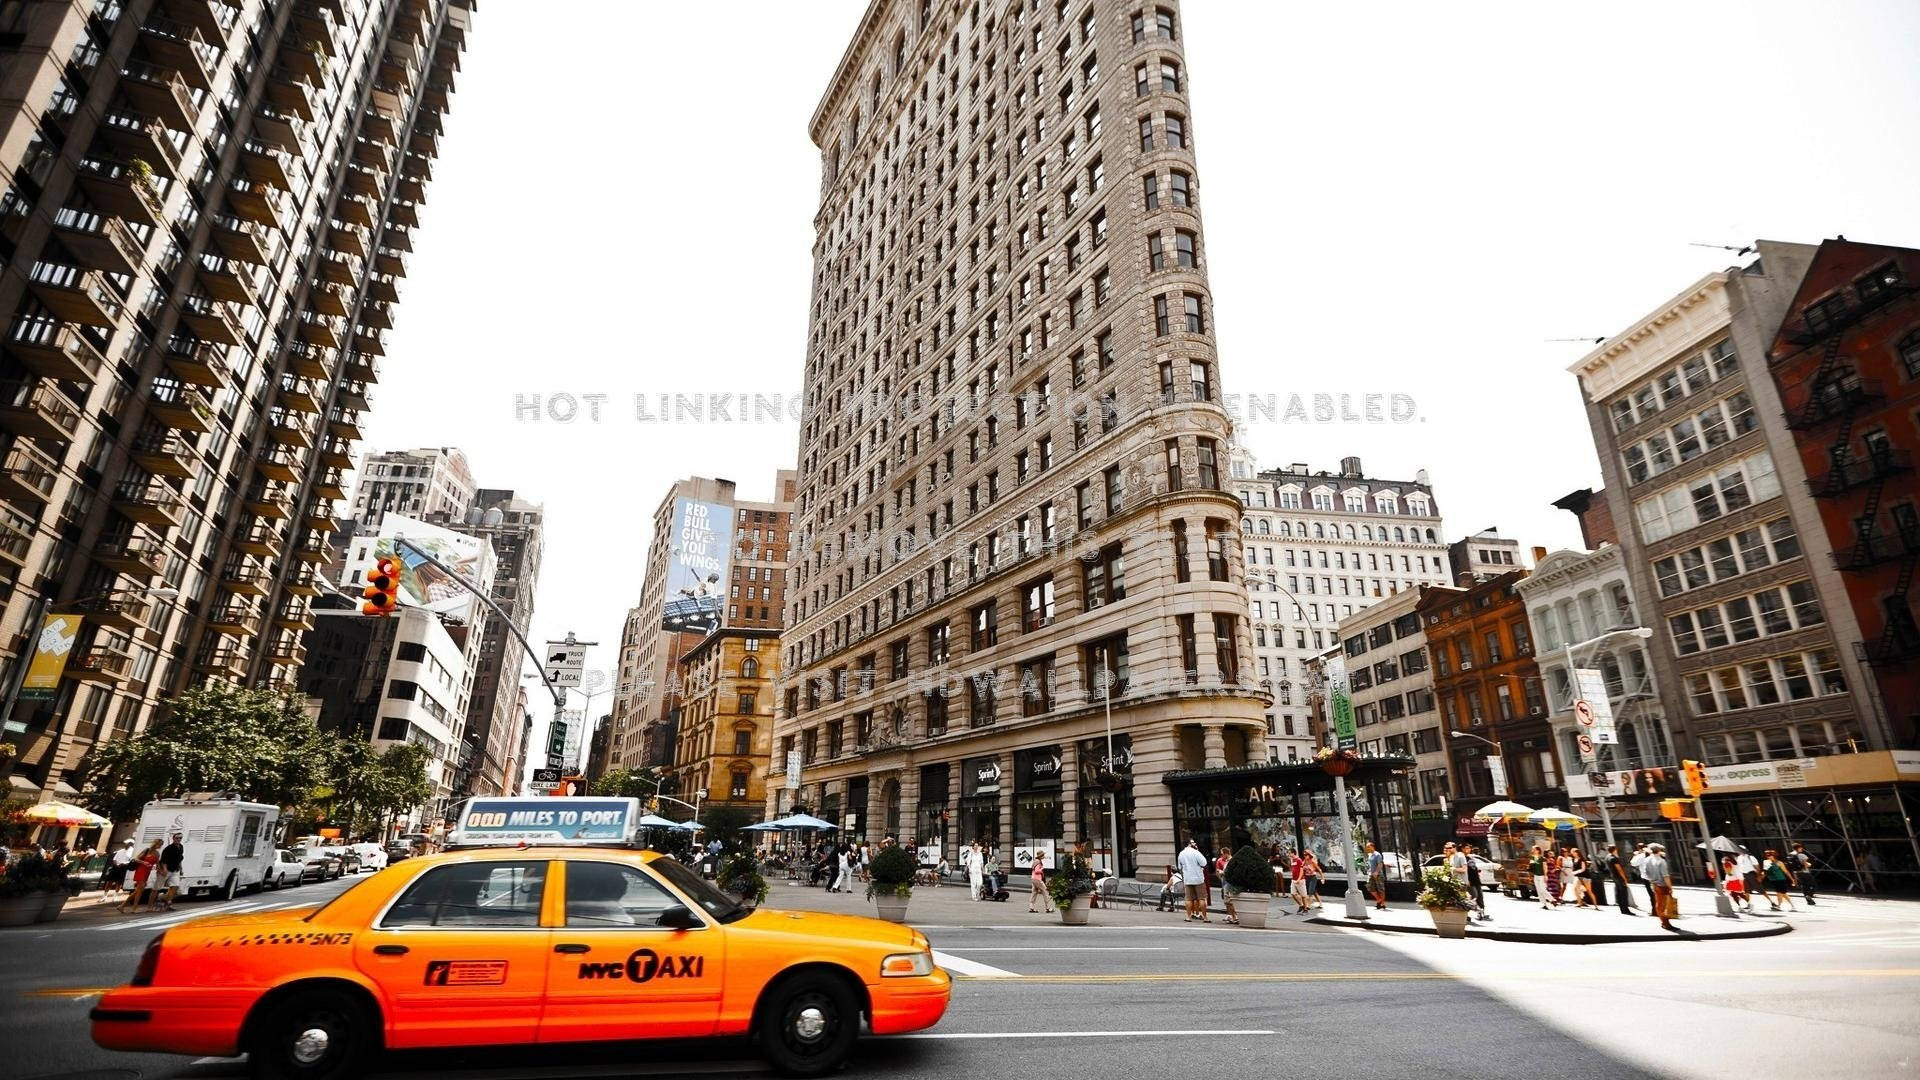 Flatironbuilding Taxi Nearby Would Translate To 